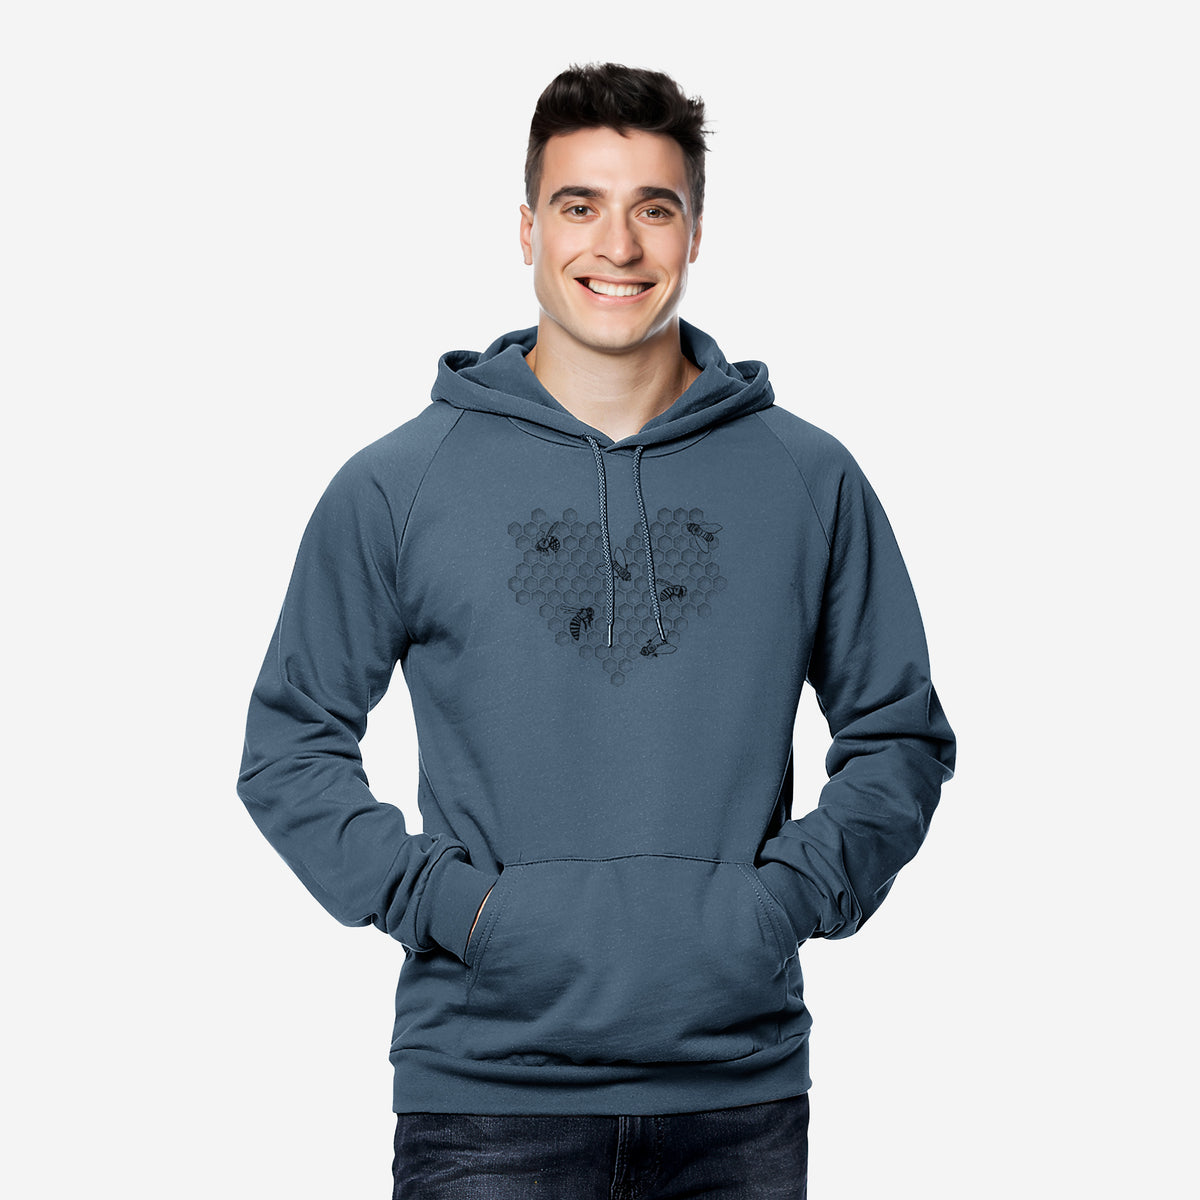 Honeycomb Heart with Bees - Unisex Pullover Hoodie - Made in USA - 100% Organic Cotton